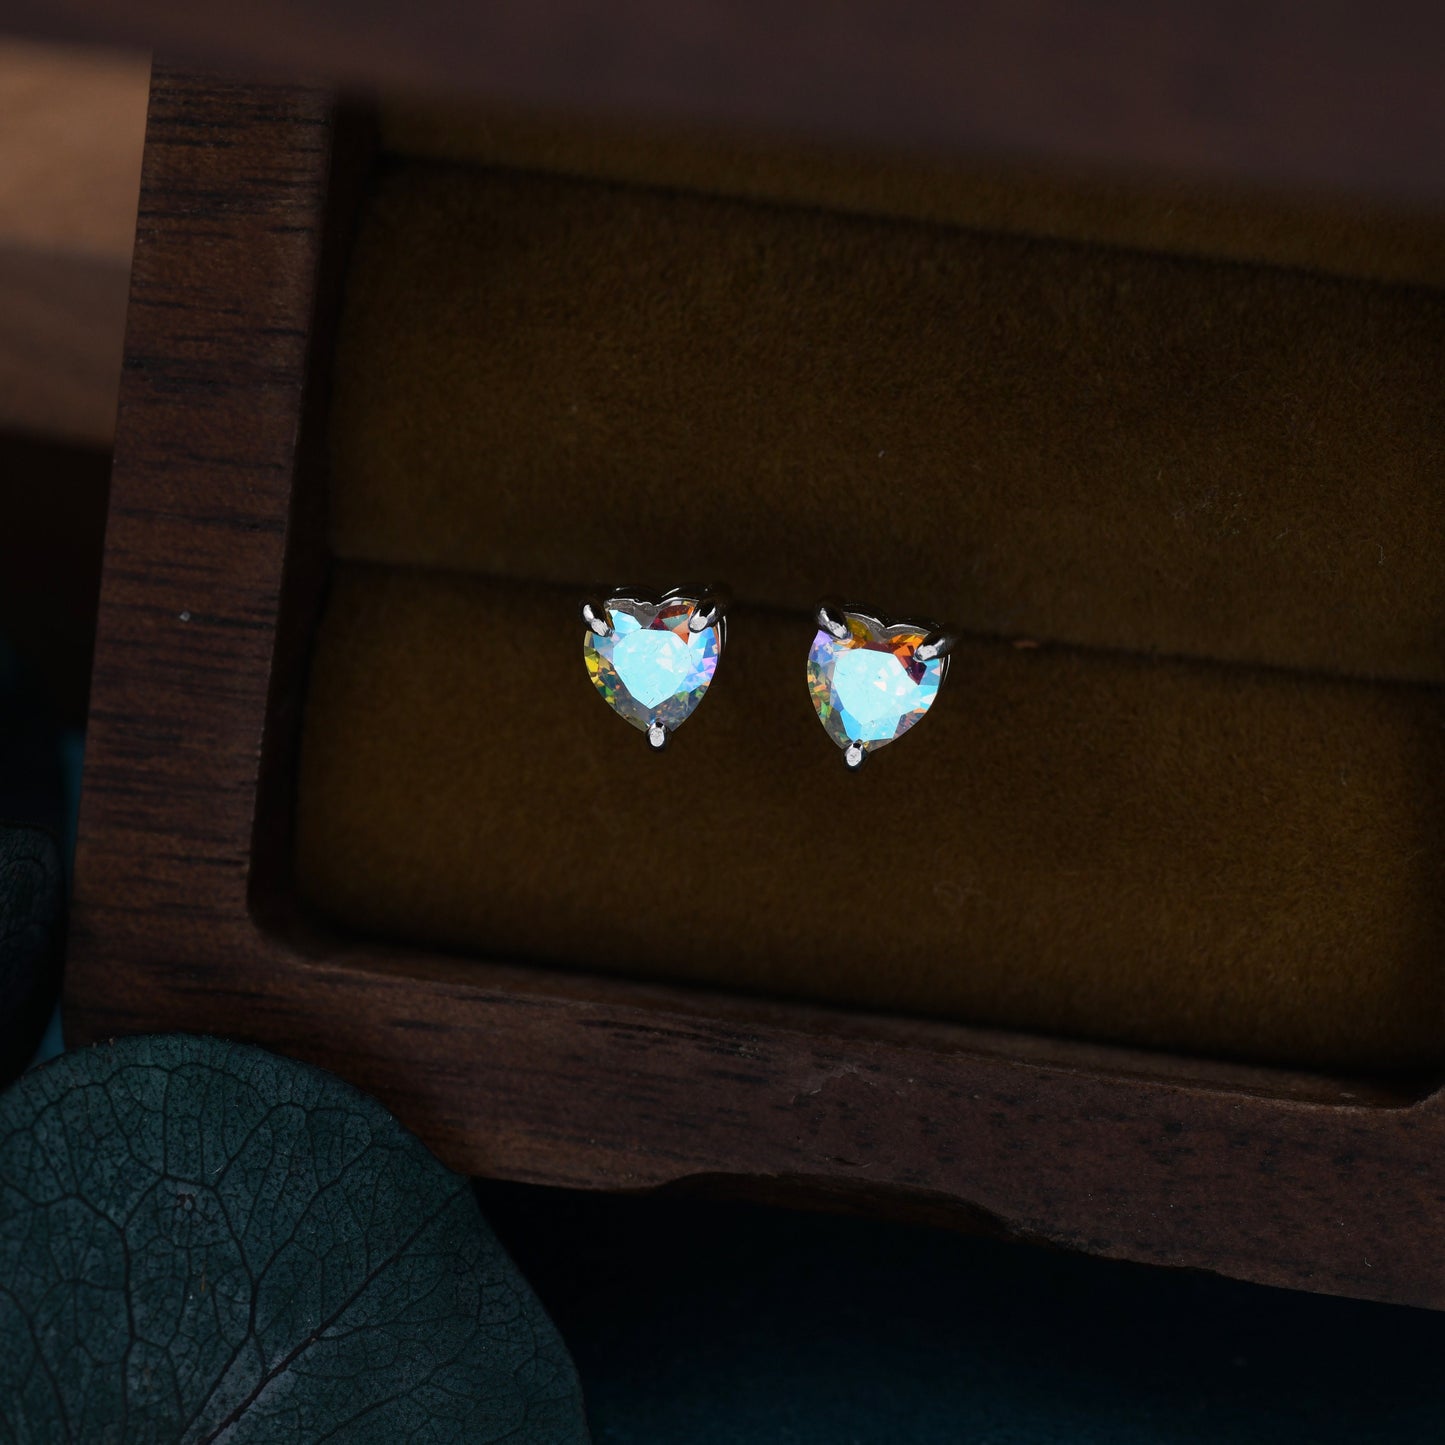 Aurora Borealis Heart Stud Earrings in Sterling Silver, Available in Three Sizes, AB CZ Heart Earrings, Aurora Colour Changing Heart Earring